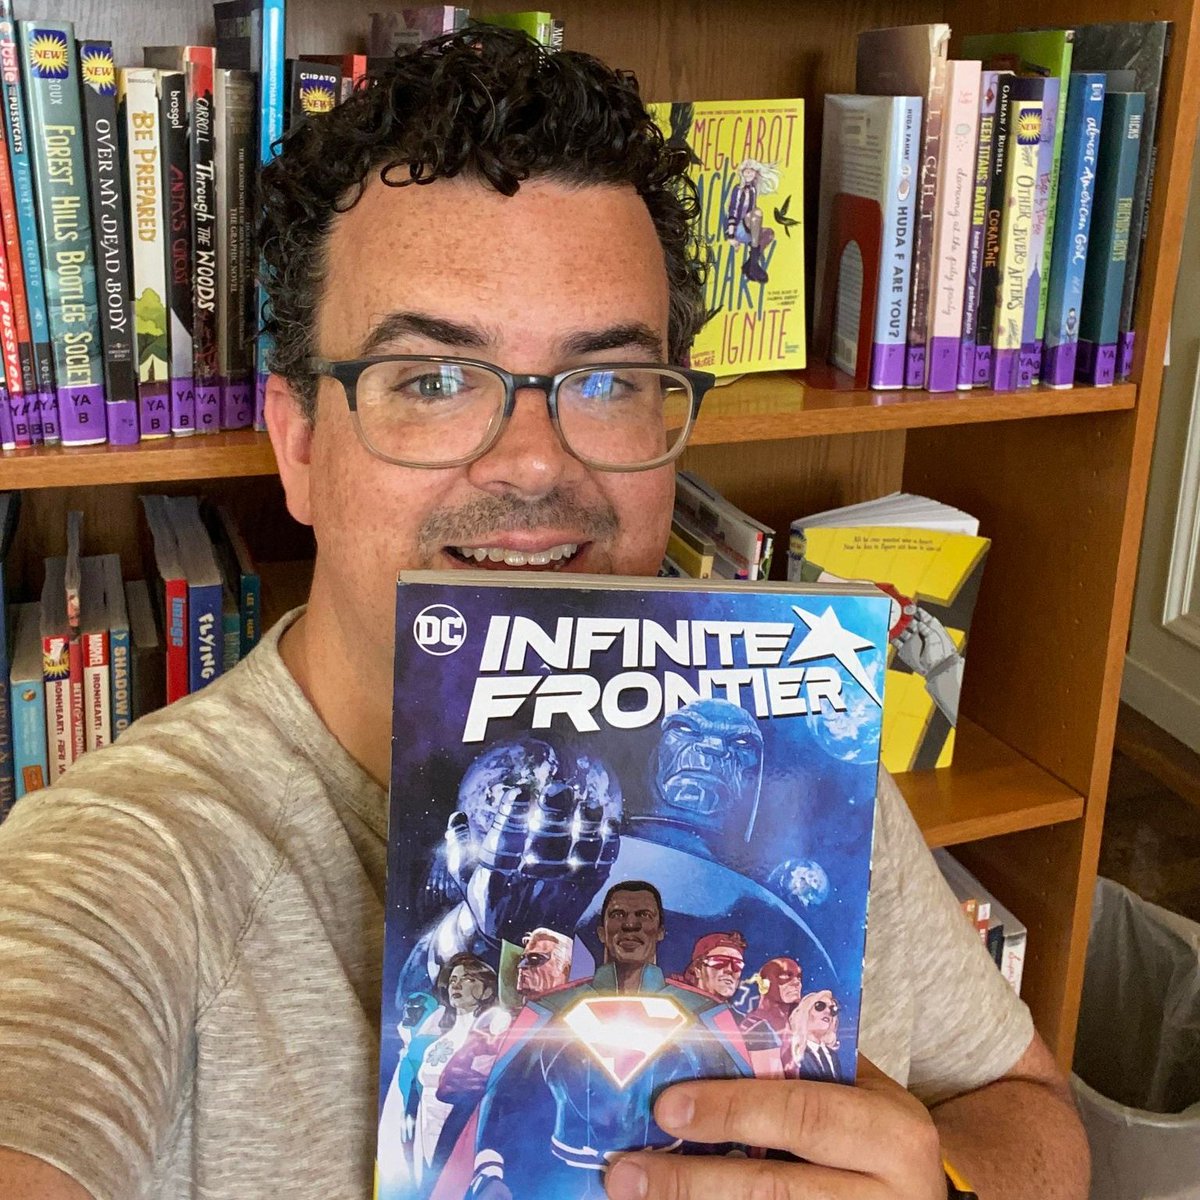 Staff Pick from Library Director Nic Gunning Infinite Frontier by Joshua Williamson, @Ariotstorm, et al., is a sprawling epic spanning the multiverse. There are a lot of moving pieces but they all come together nicely. Standout characters include the Green Latern & Superman!